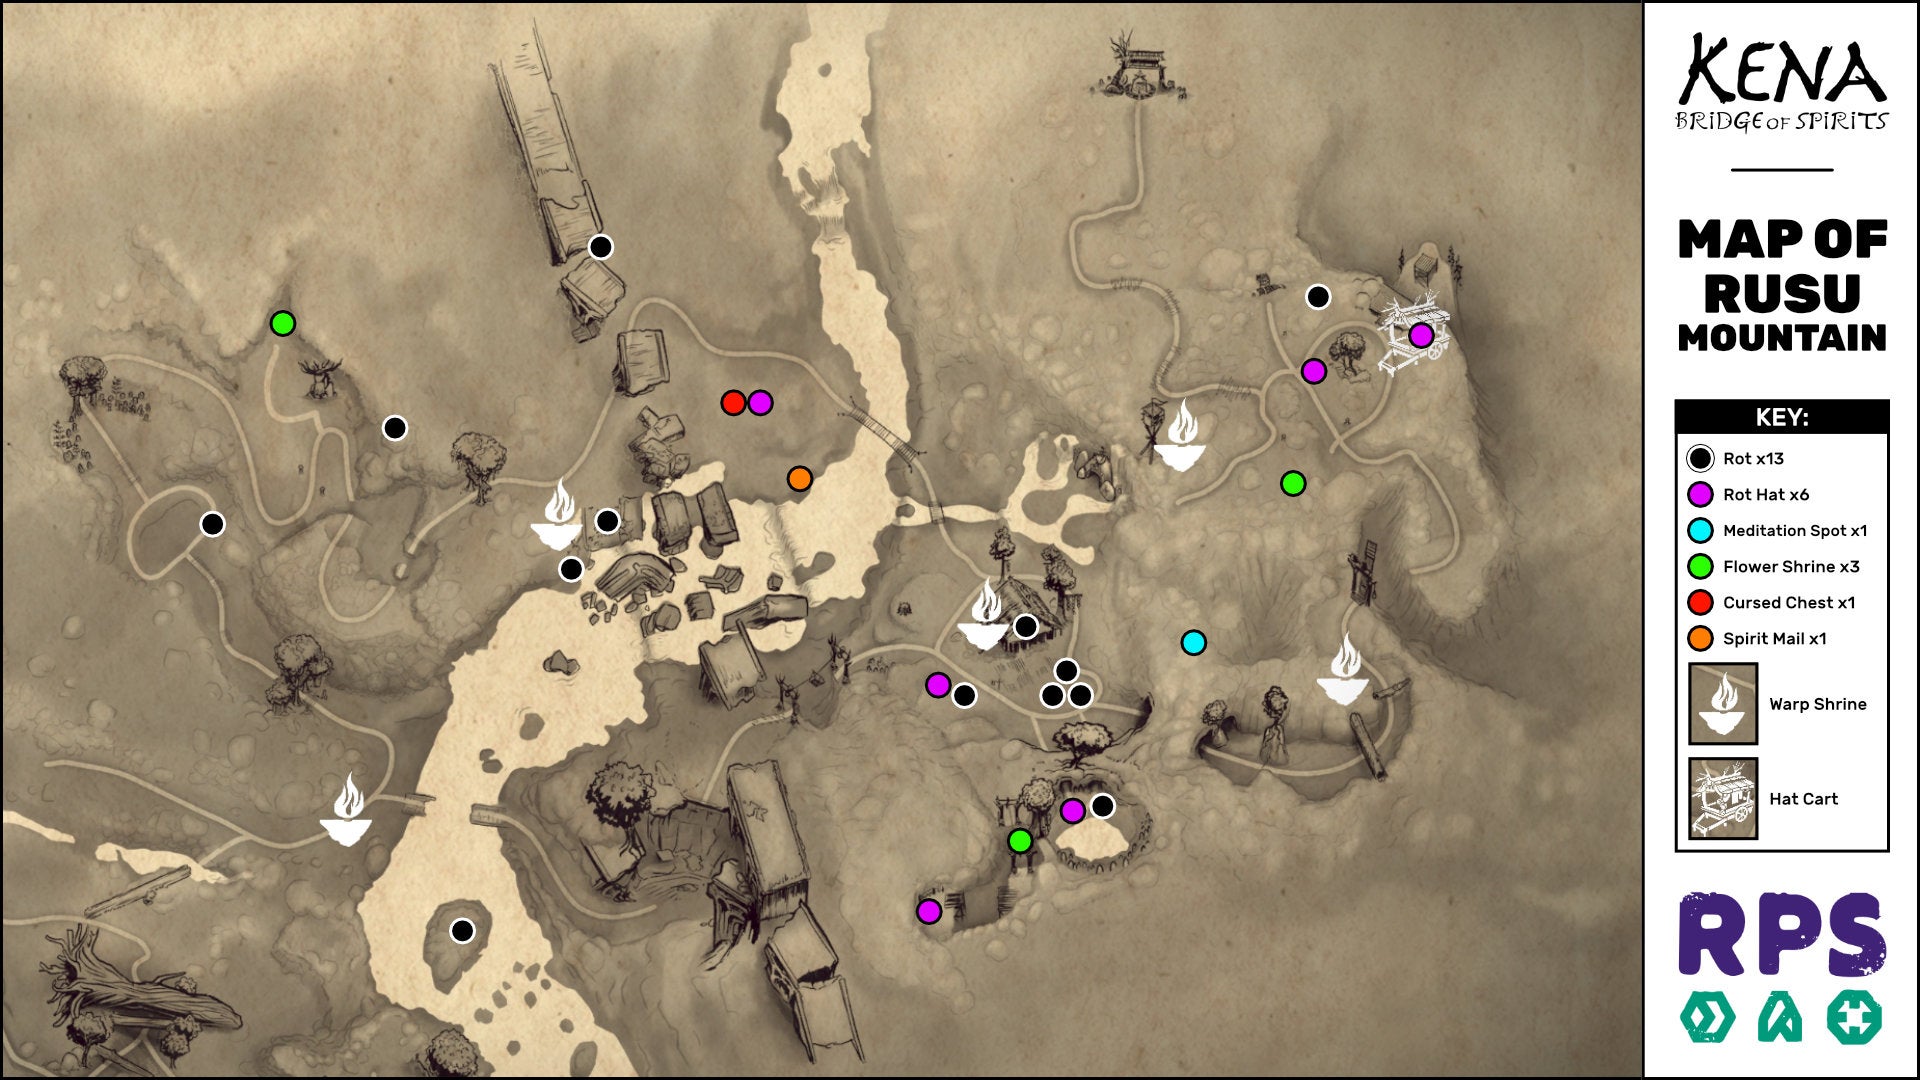 A map of the Rusu Mountain area of Kena: Bridge Of Spirits with all collectible locations marked.